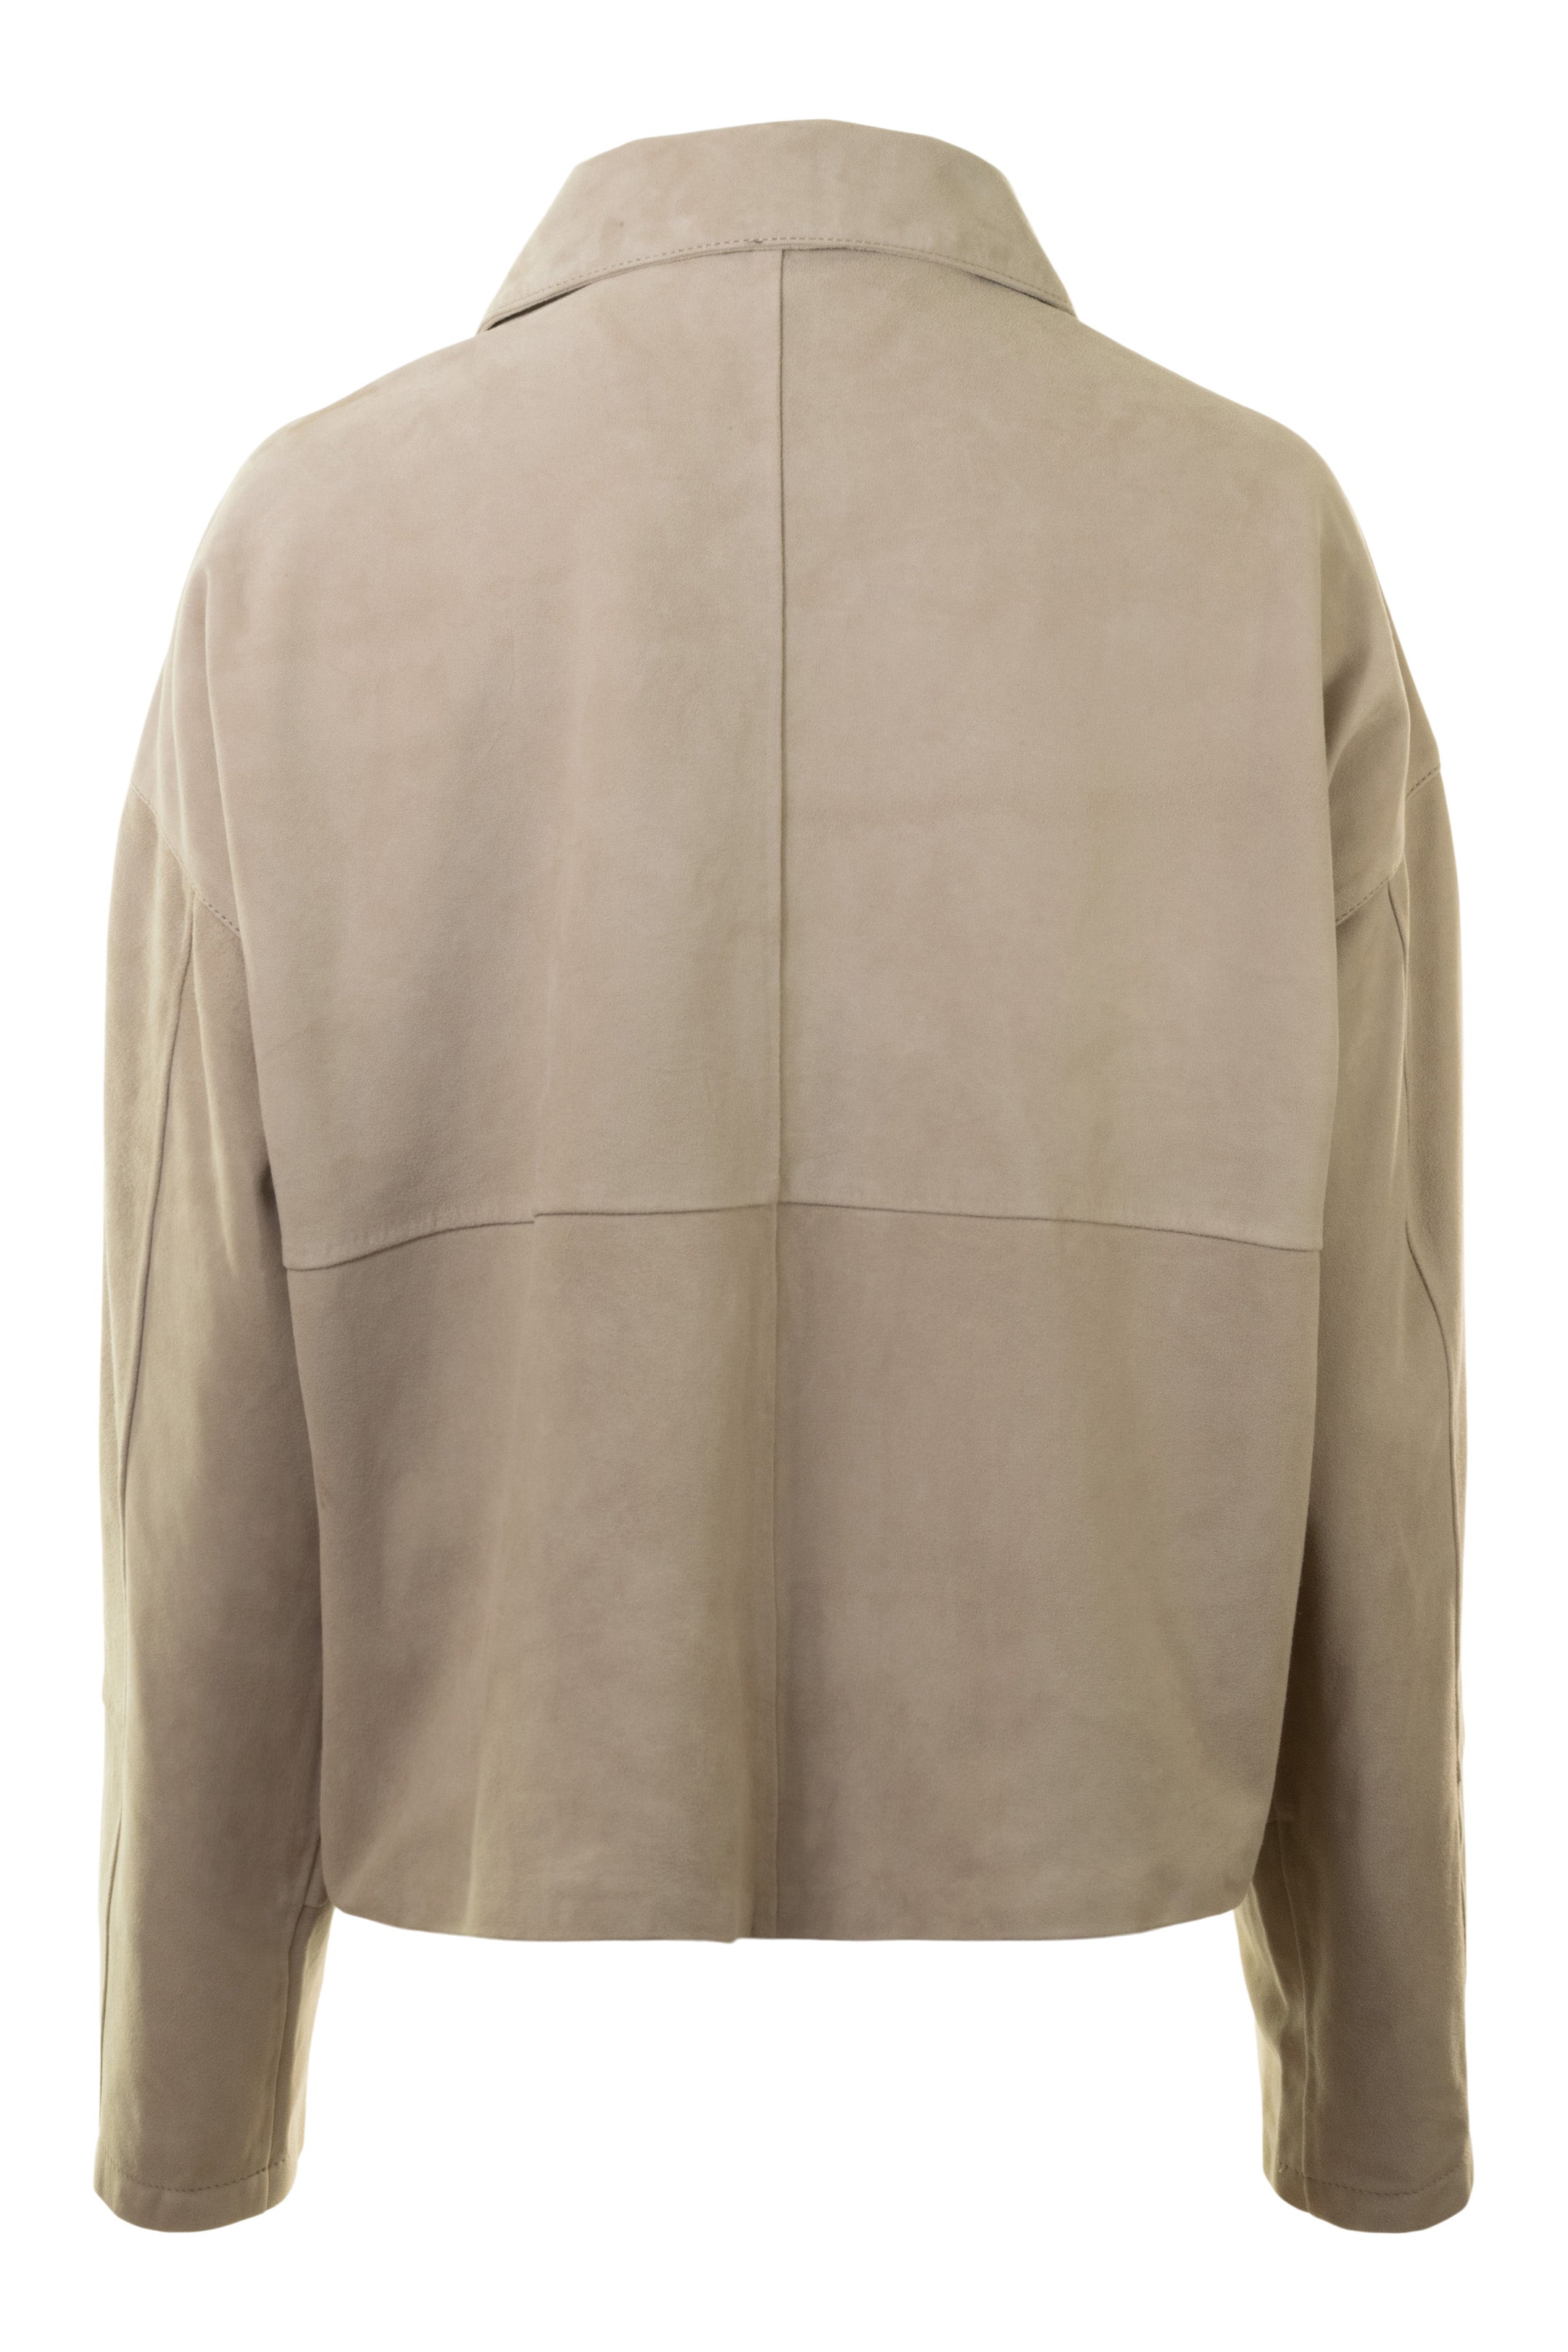 Repeat Cashmere Buttoned Suede Jacket With Shirt Collar in Nougat